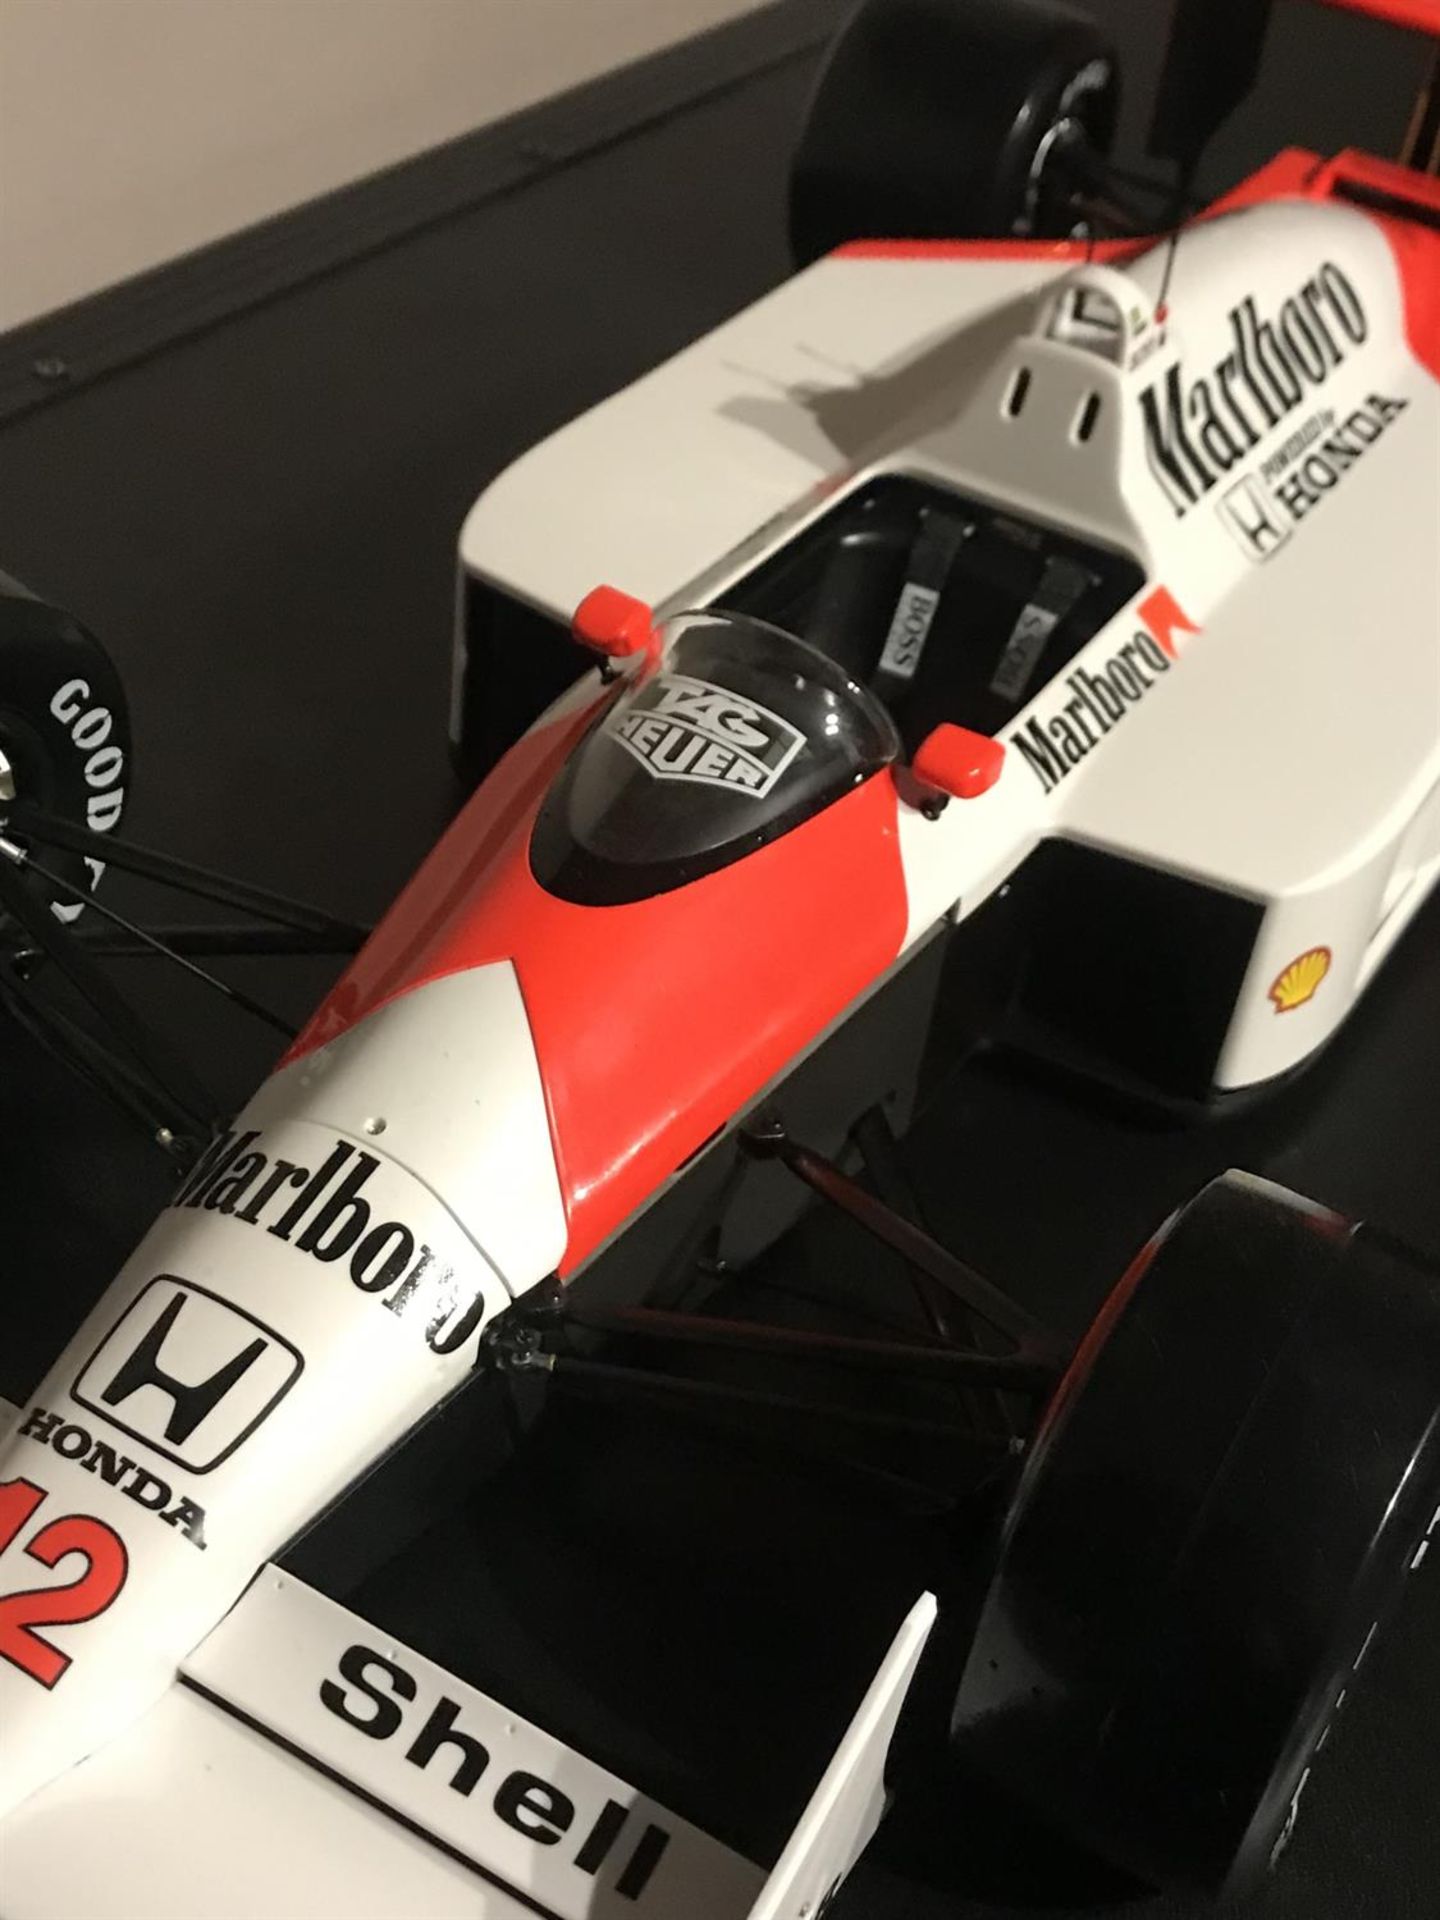 McLaren MP4/4 1:8th Scale Highly Detailed Kyosho DeAgostini Model with Display Case - Image 9 of 10